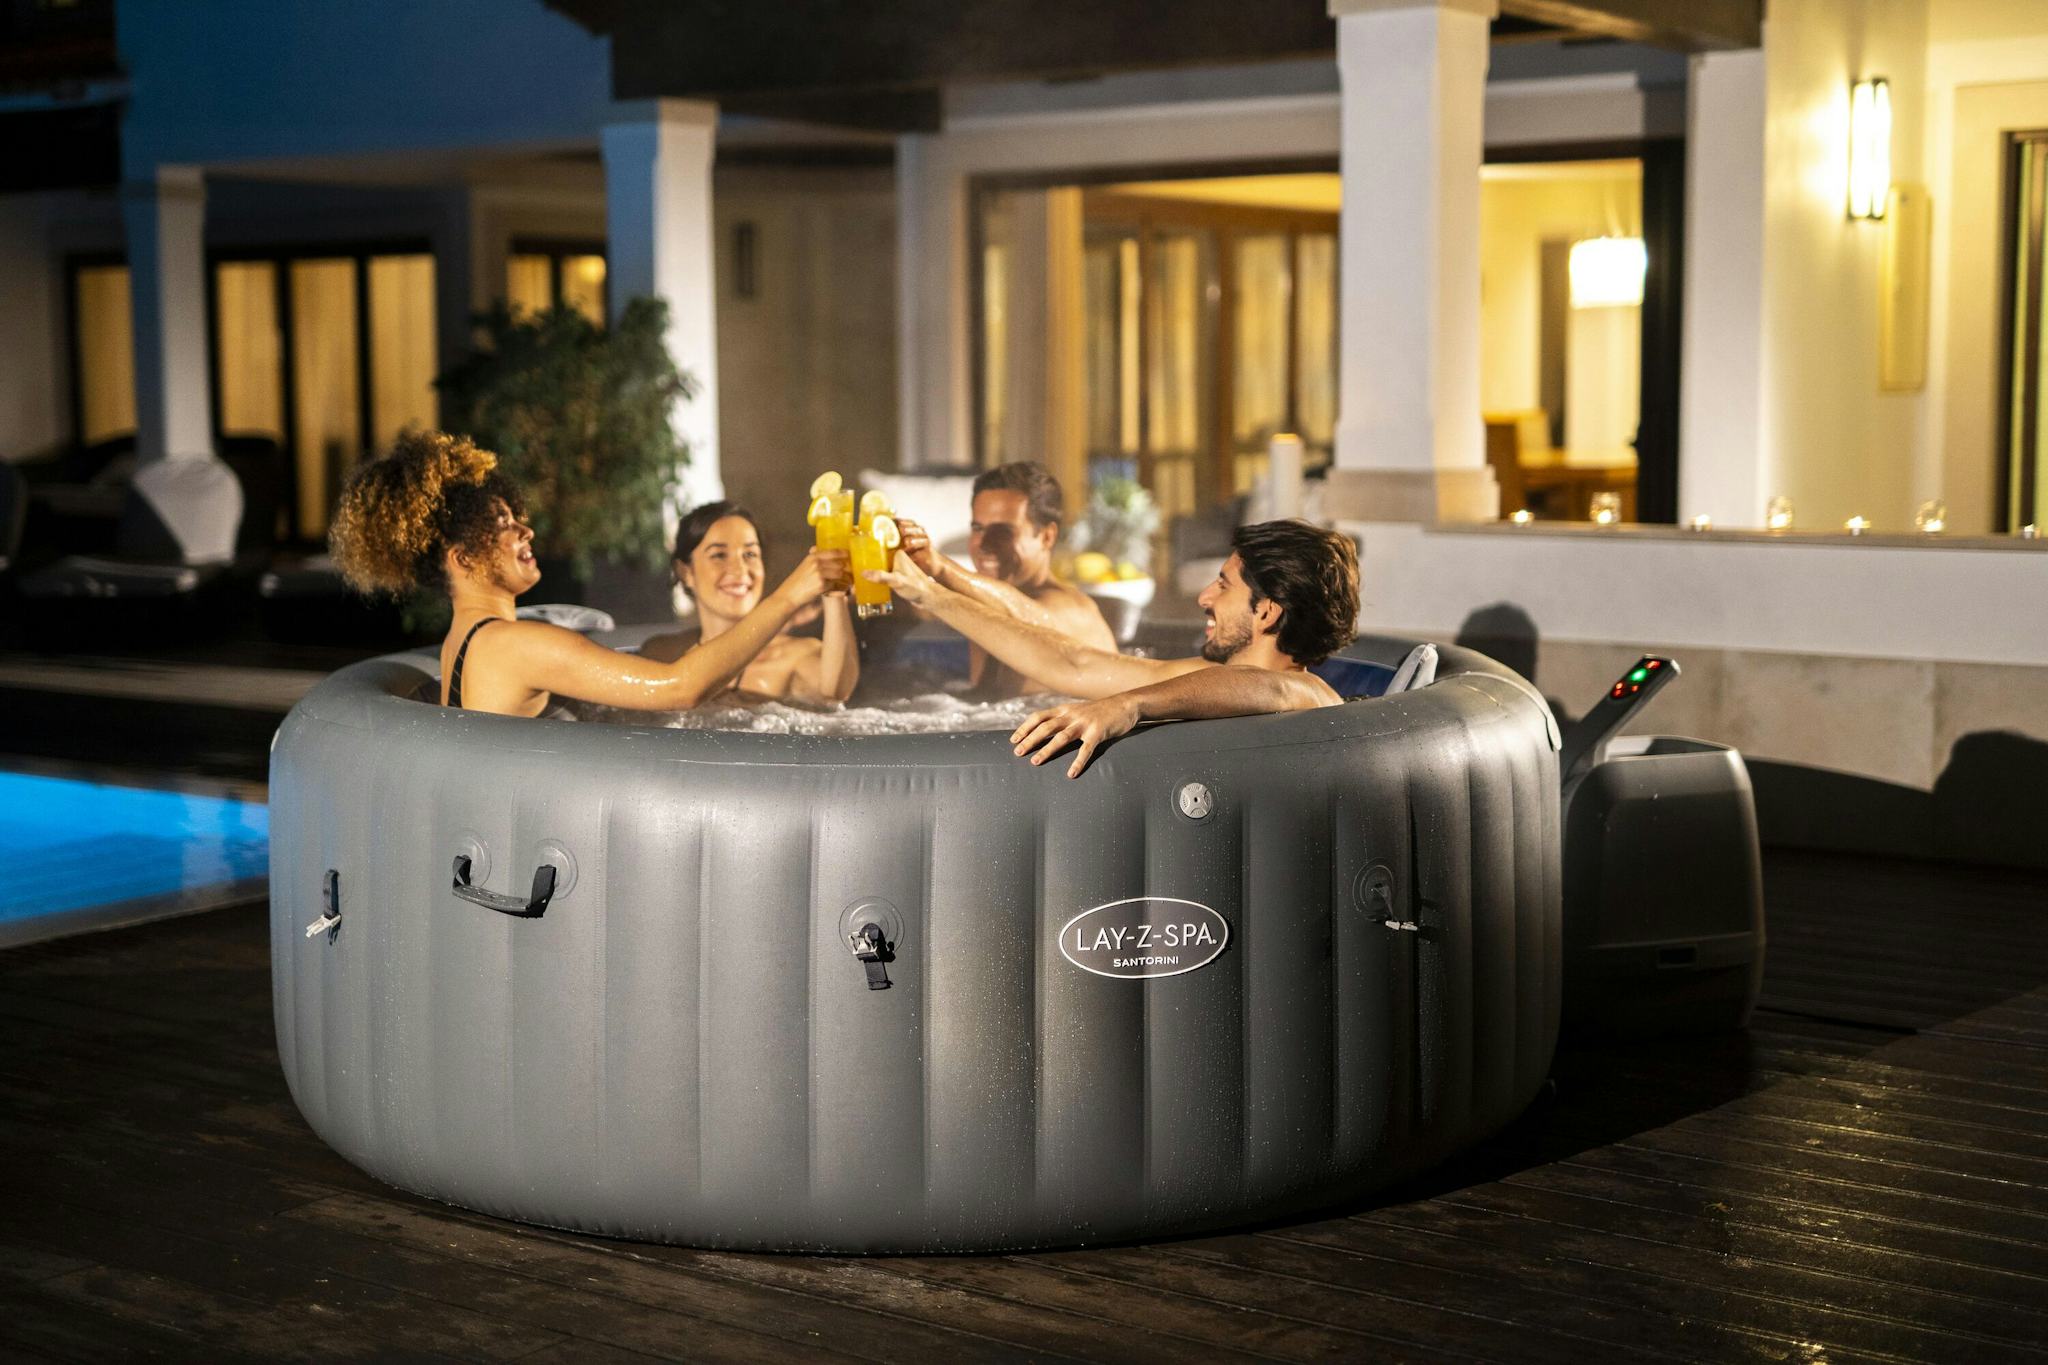 Spas Gonflables Spa gonflable rond Lay-Z-Spa Santorini Hydrojet pro™ 5 - 7 personnes Bestway 15